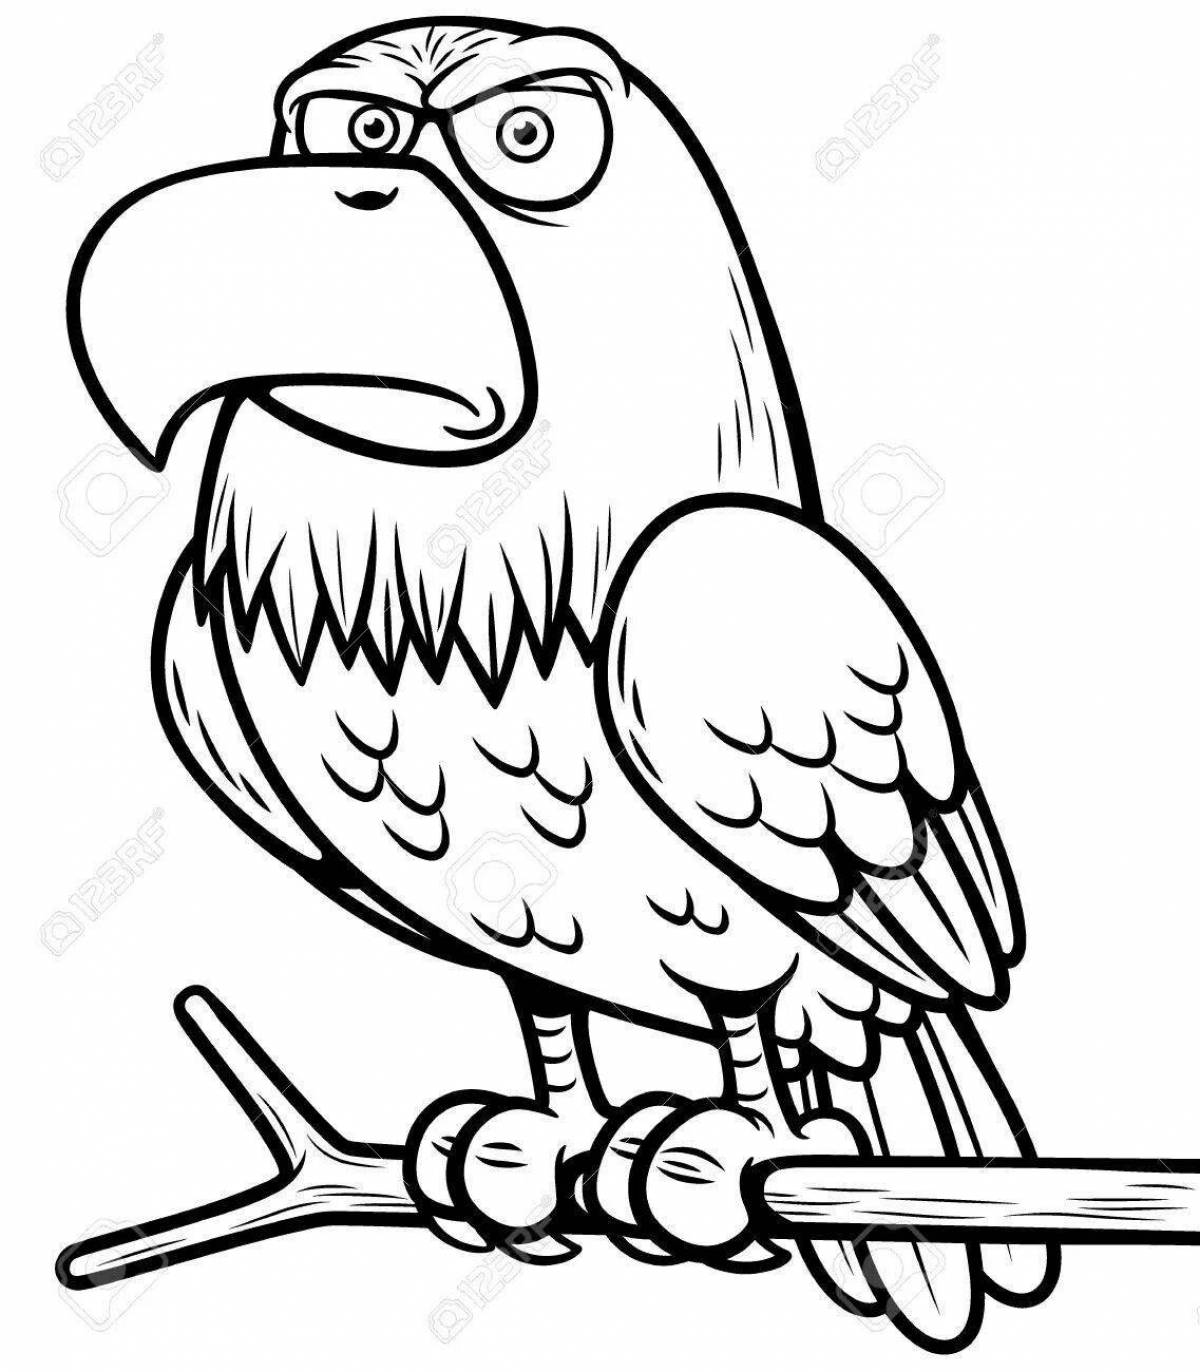 Coloring page playful eaglet